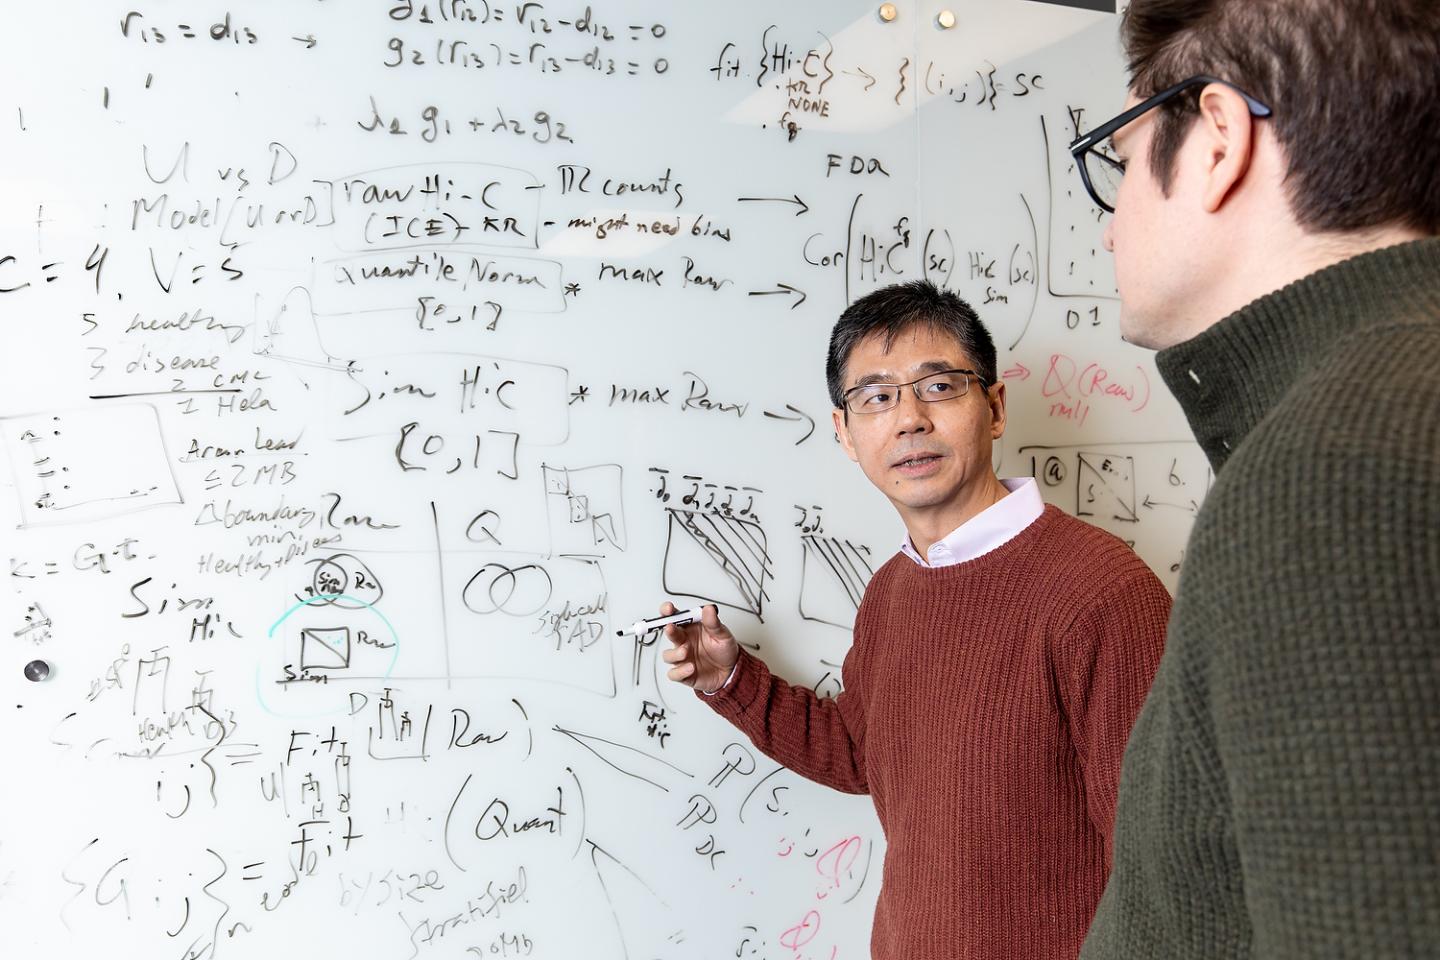 Jie Liang, University of Illinois at Chicago